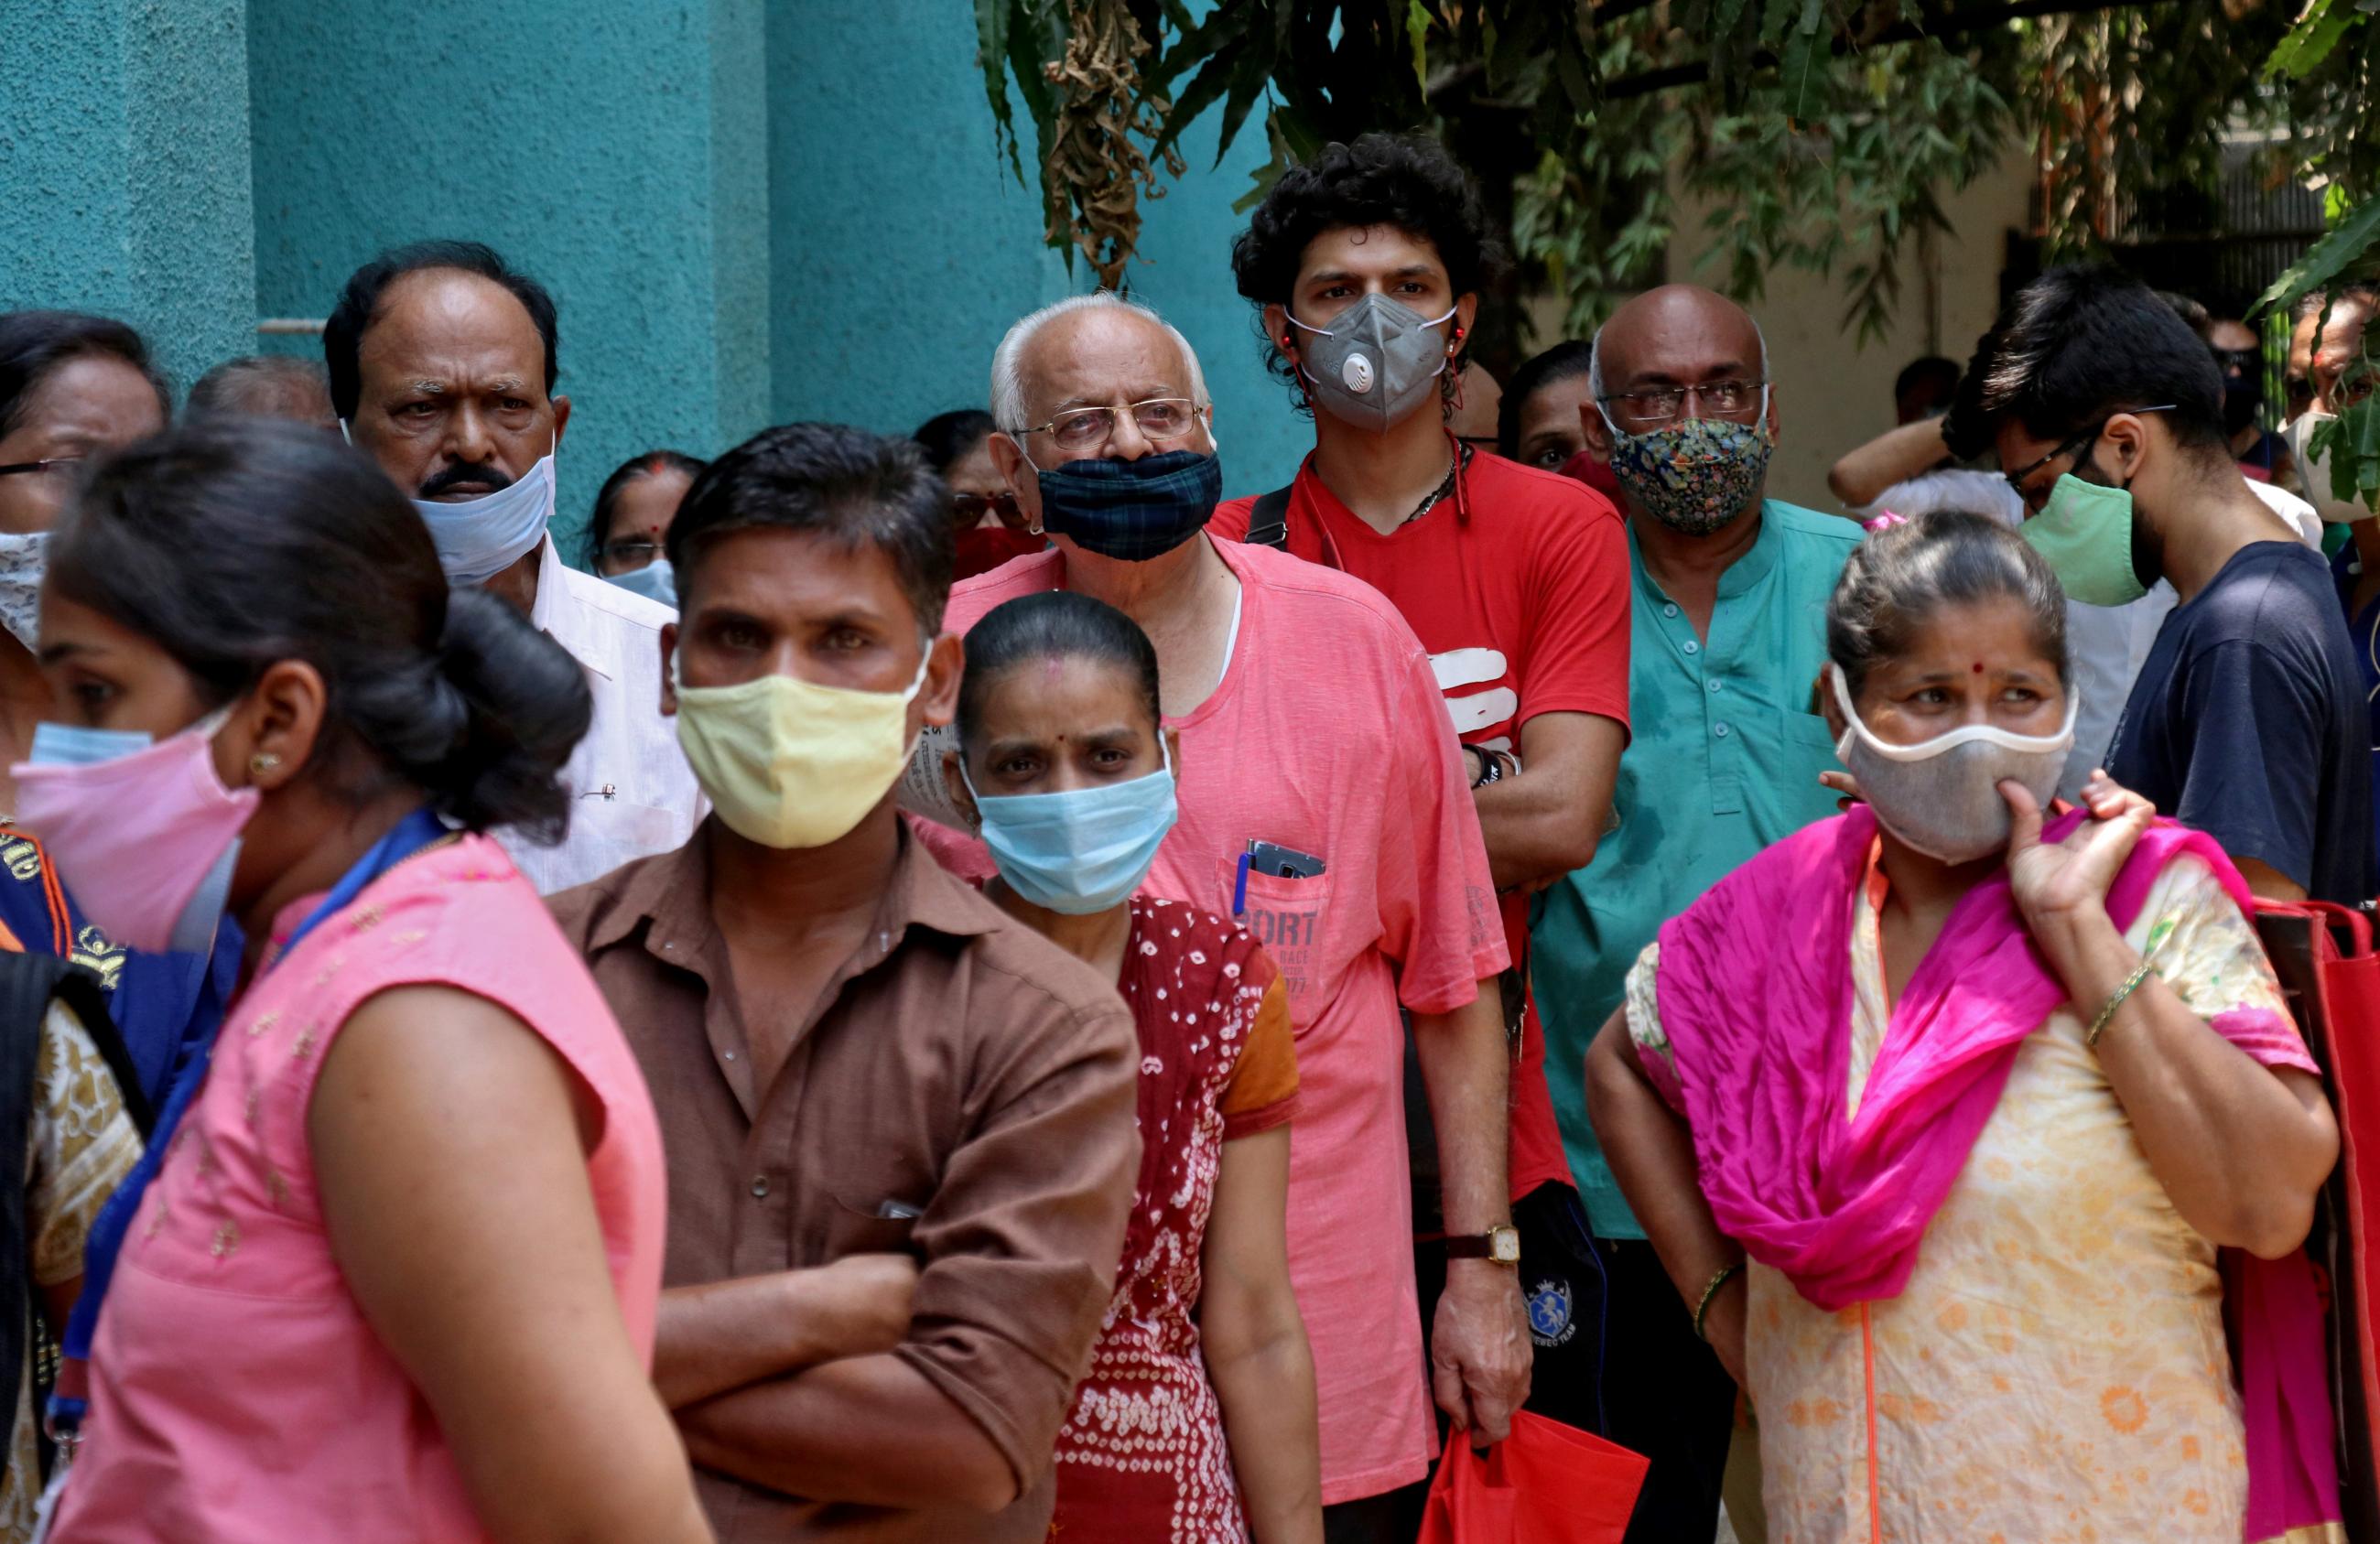 People wearing protective face masks wait to receive a vaccine against the coronavirus disease at a vaccination center in Mumbai, India on April 28, 2021. 